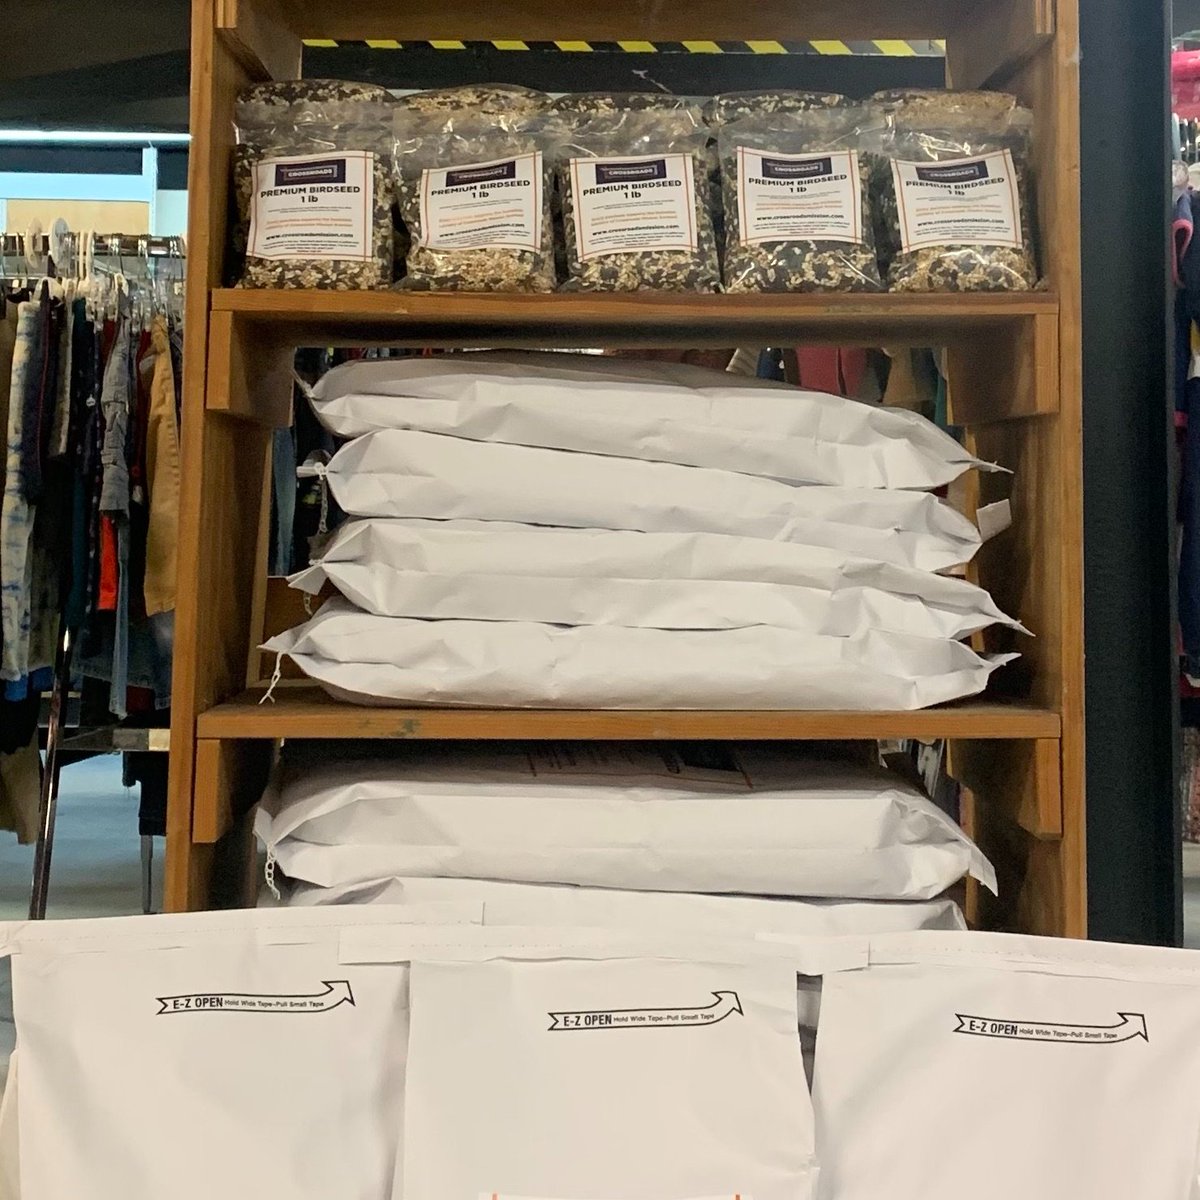 Buy a bag of Crossroads Mission Avenue Premium Birdseed TODAY at Mission Avenue Thrift! Provide for our struggling neighbors while caring for our local wildlife! 🐦‍⬛ crossroadsmission.com/thrift-stores/ #MissionAvenueThrift #CrossroadsMissionAvenue #BirdSeed #ComeShop #GreatDeals